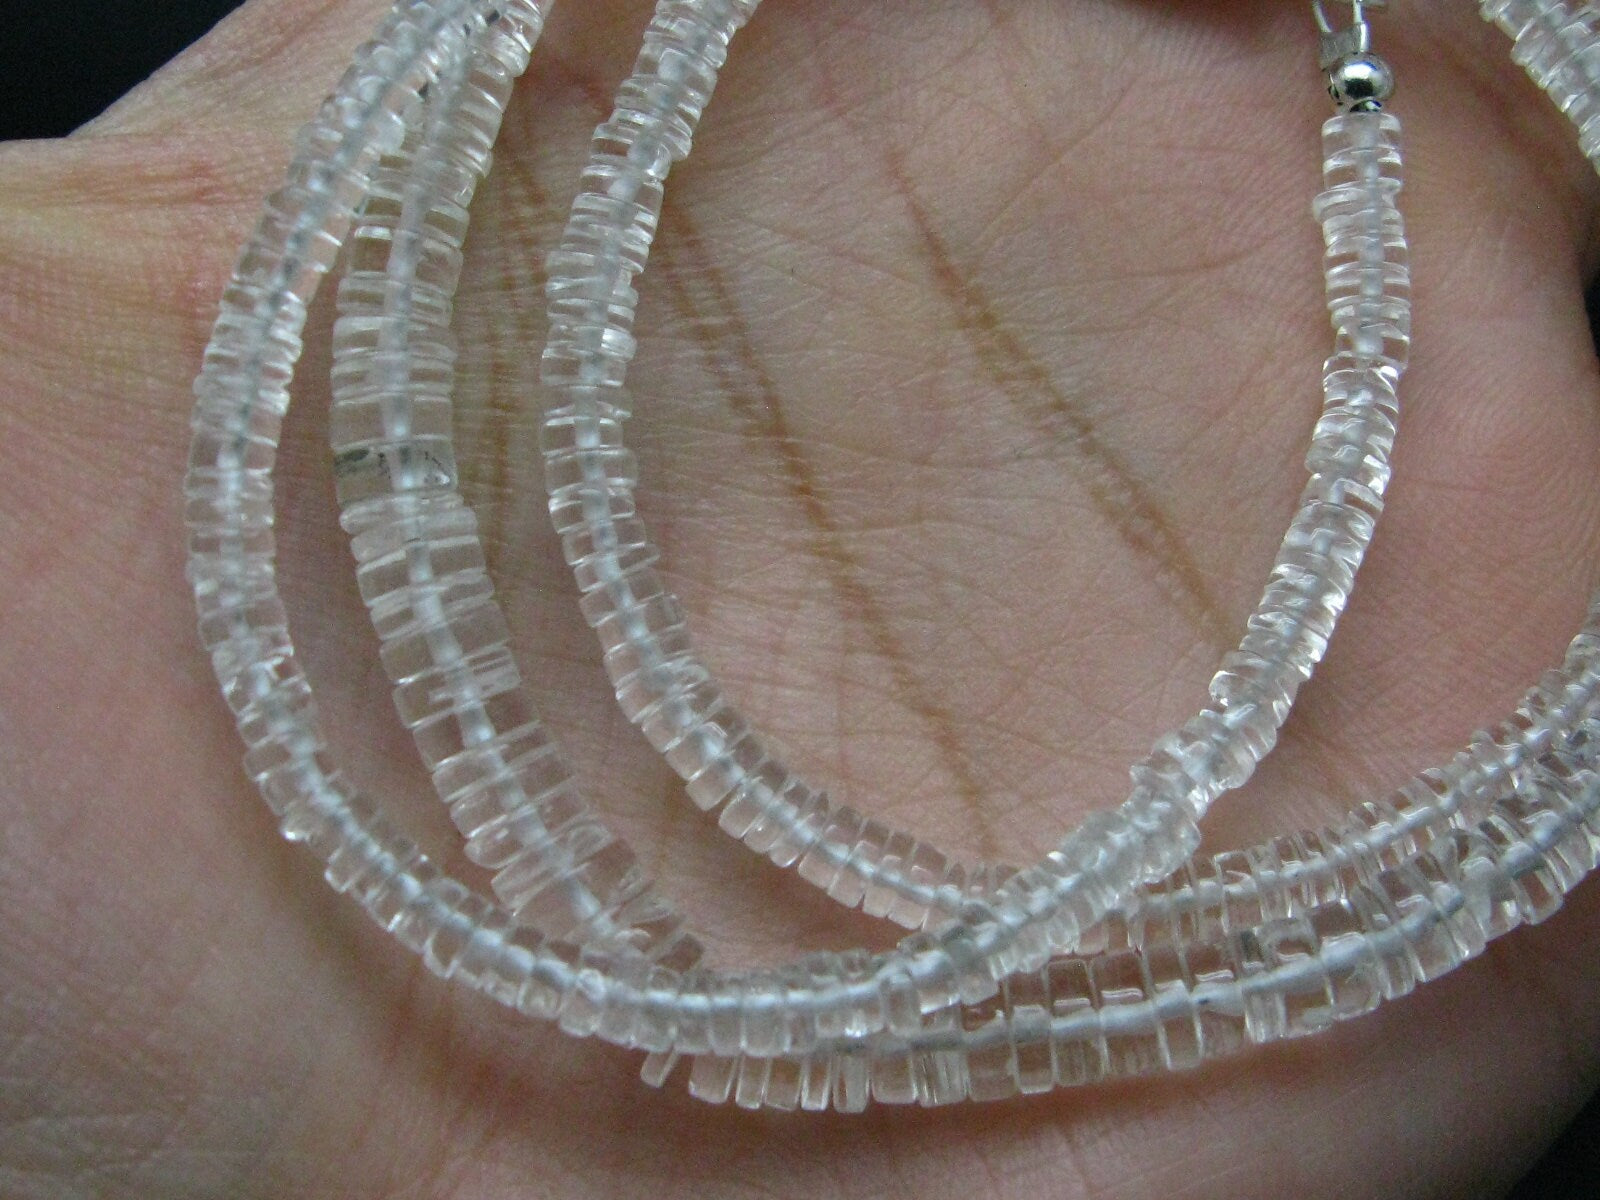 Rare Clear Petalite Necklace Beads From Brazil - 18 - Rondelle